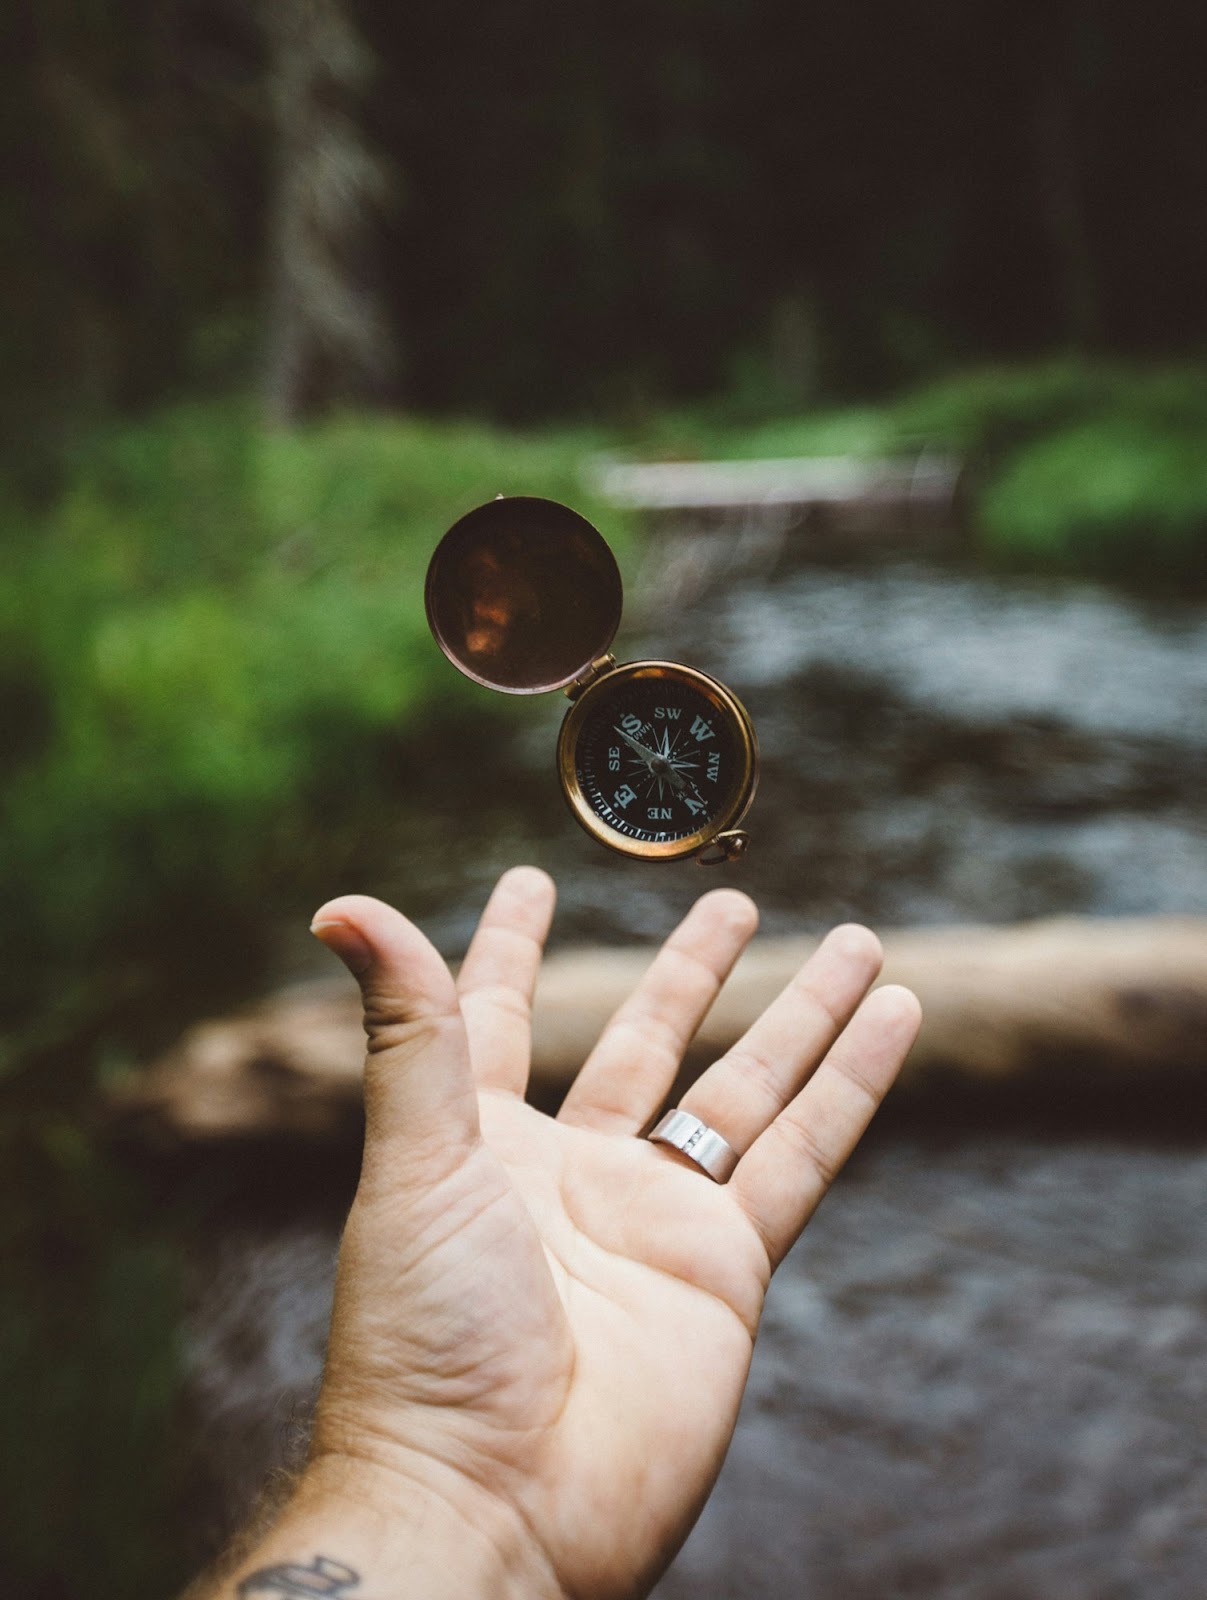 A person’s hand catching a compass in front of an out-of-focus riverbed.